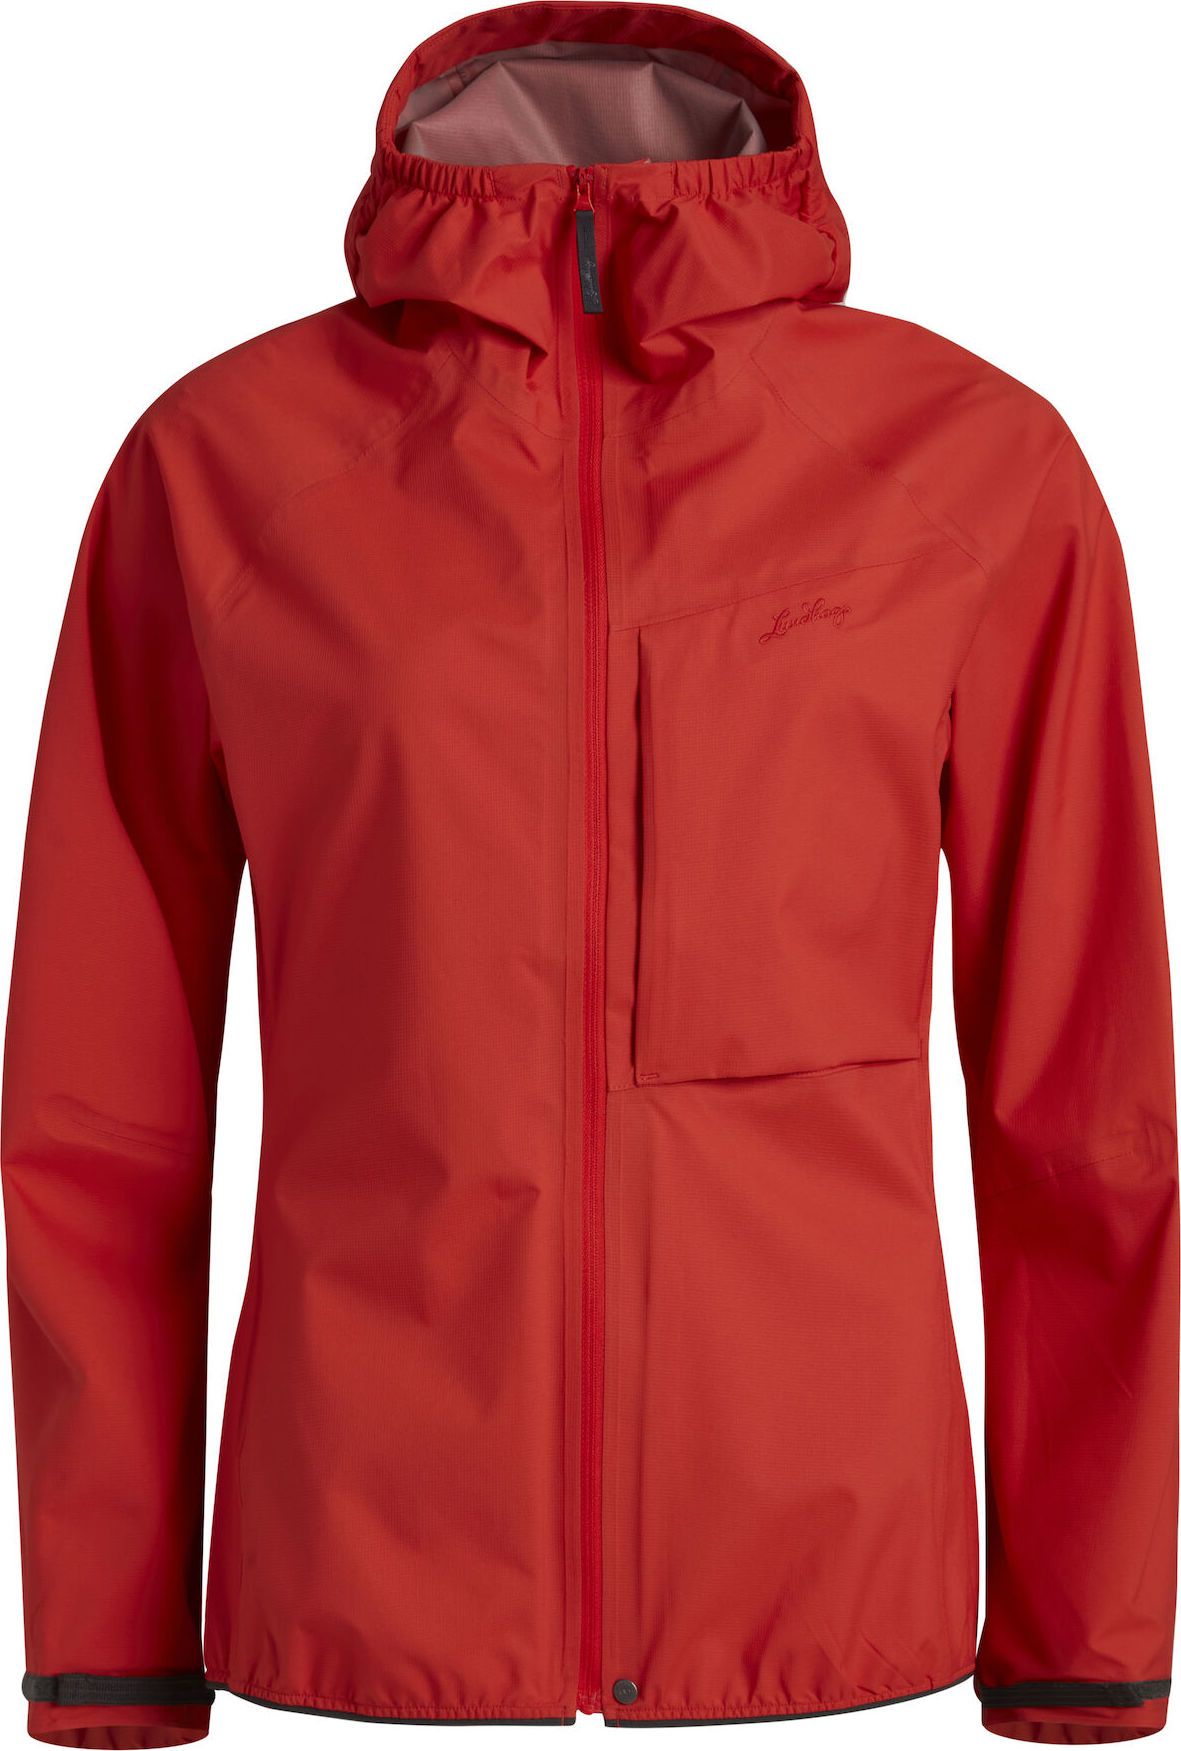 Women's Lo Jacket Lively Red